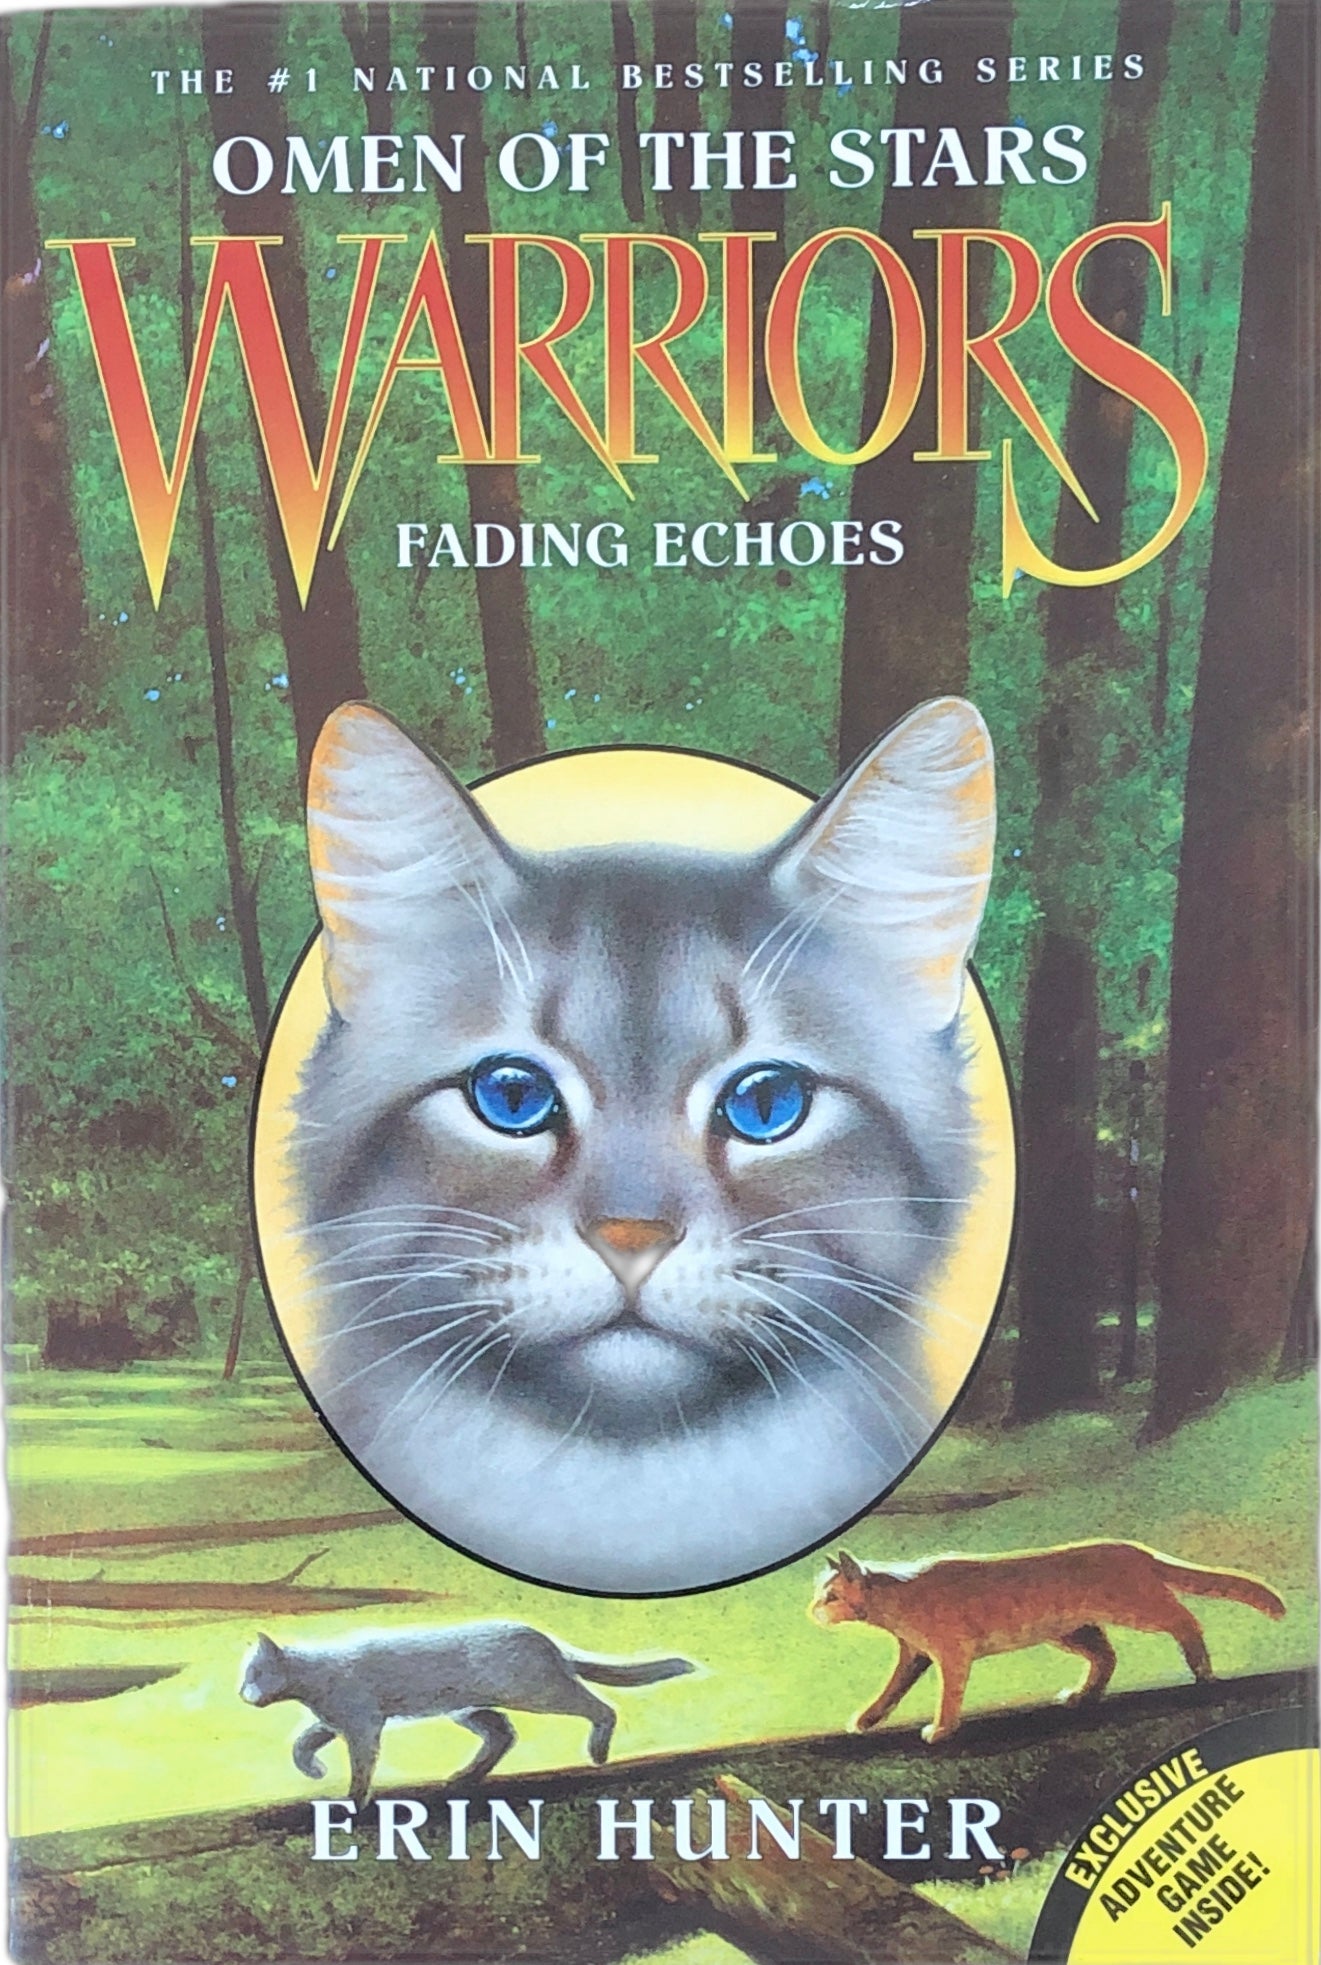 Warriors: Fading Echoes (Omen of the Stars Book #2) by Erin Hunter